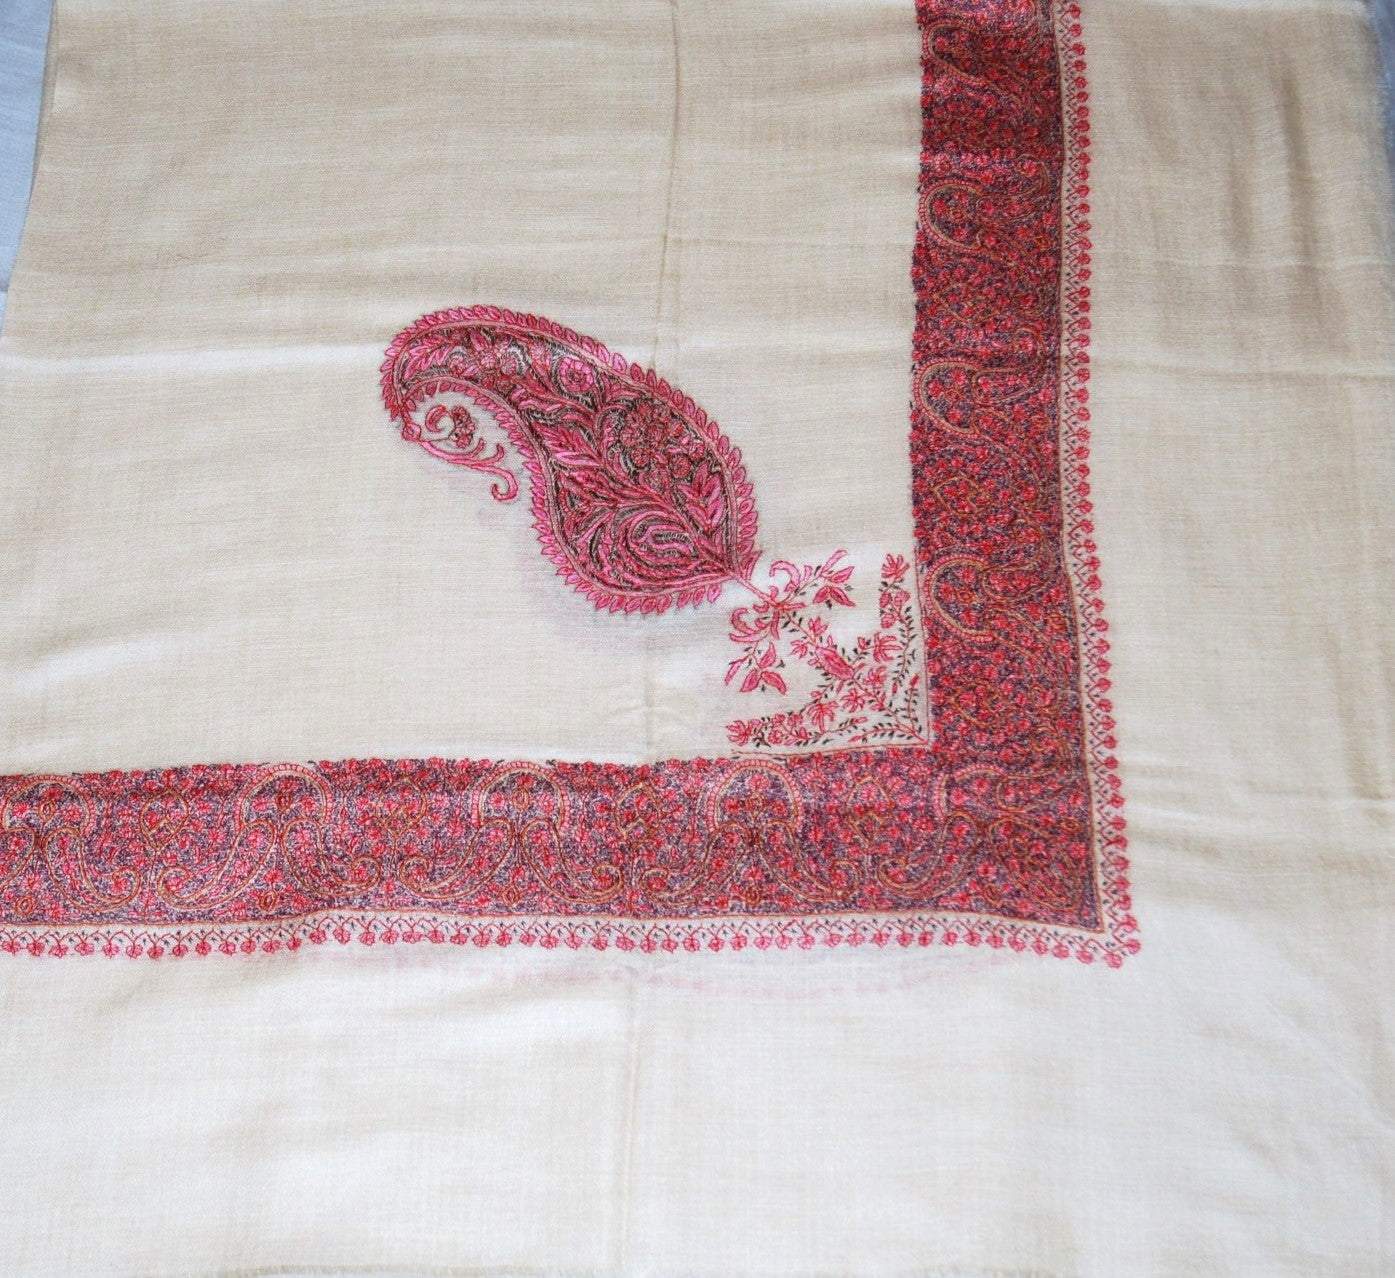 Multicolor on White Arab Scarf Shemagh, Pashmina "Cashmere" Embroidered Handloom Shawl #PRM-102